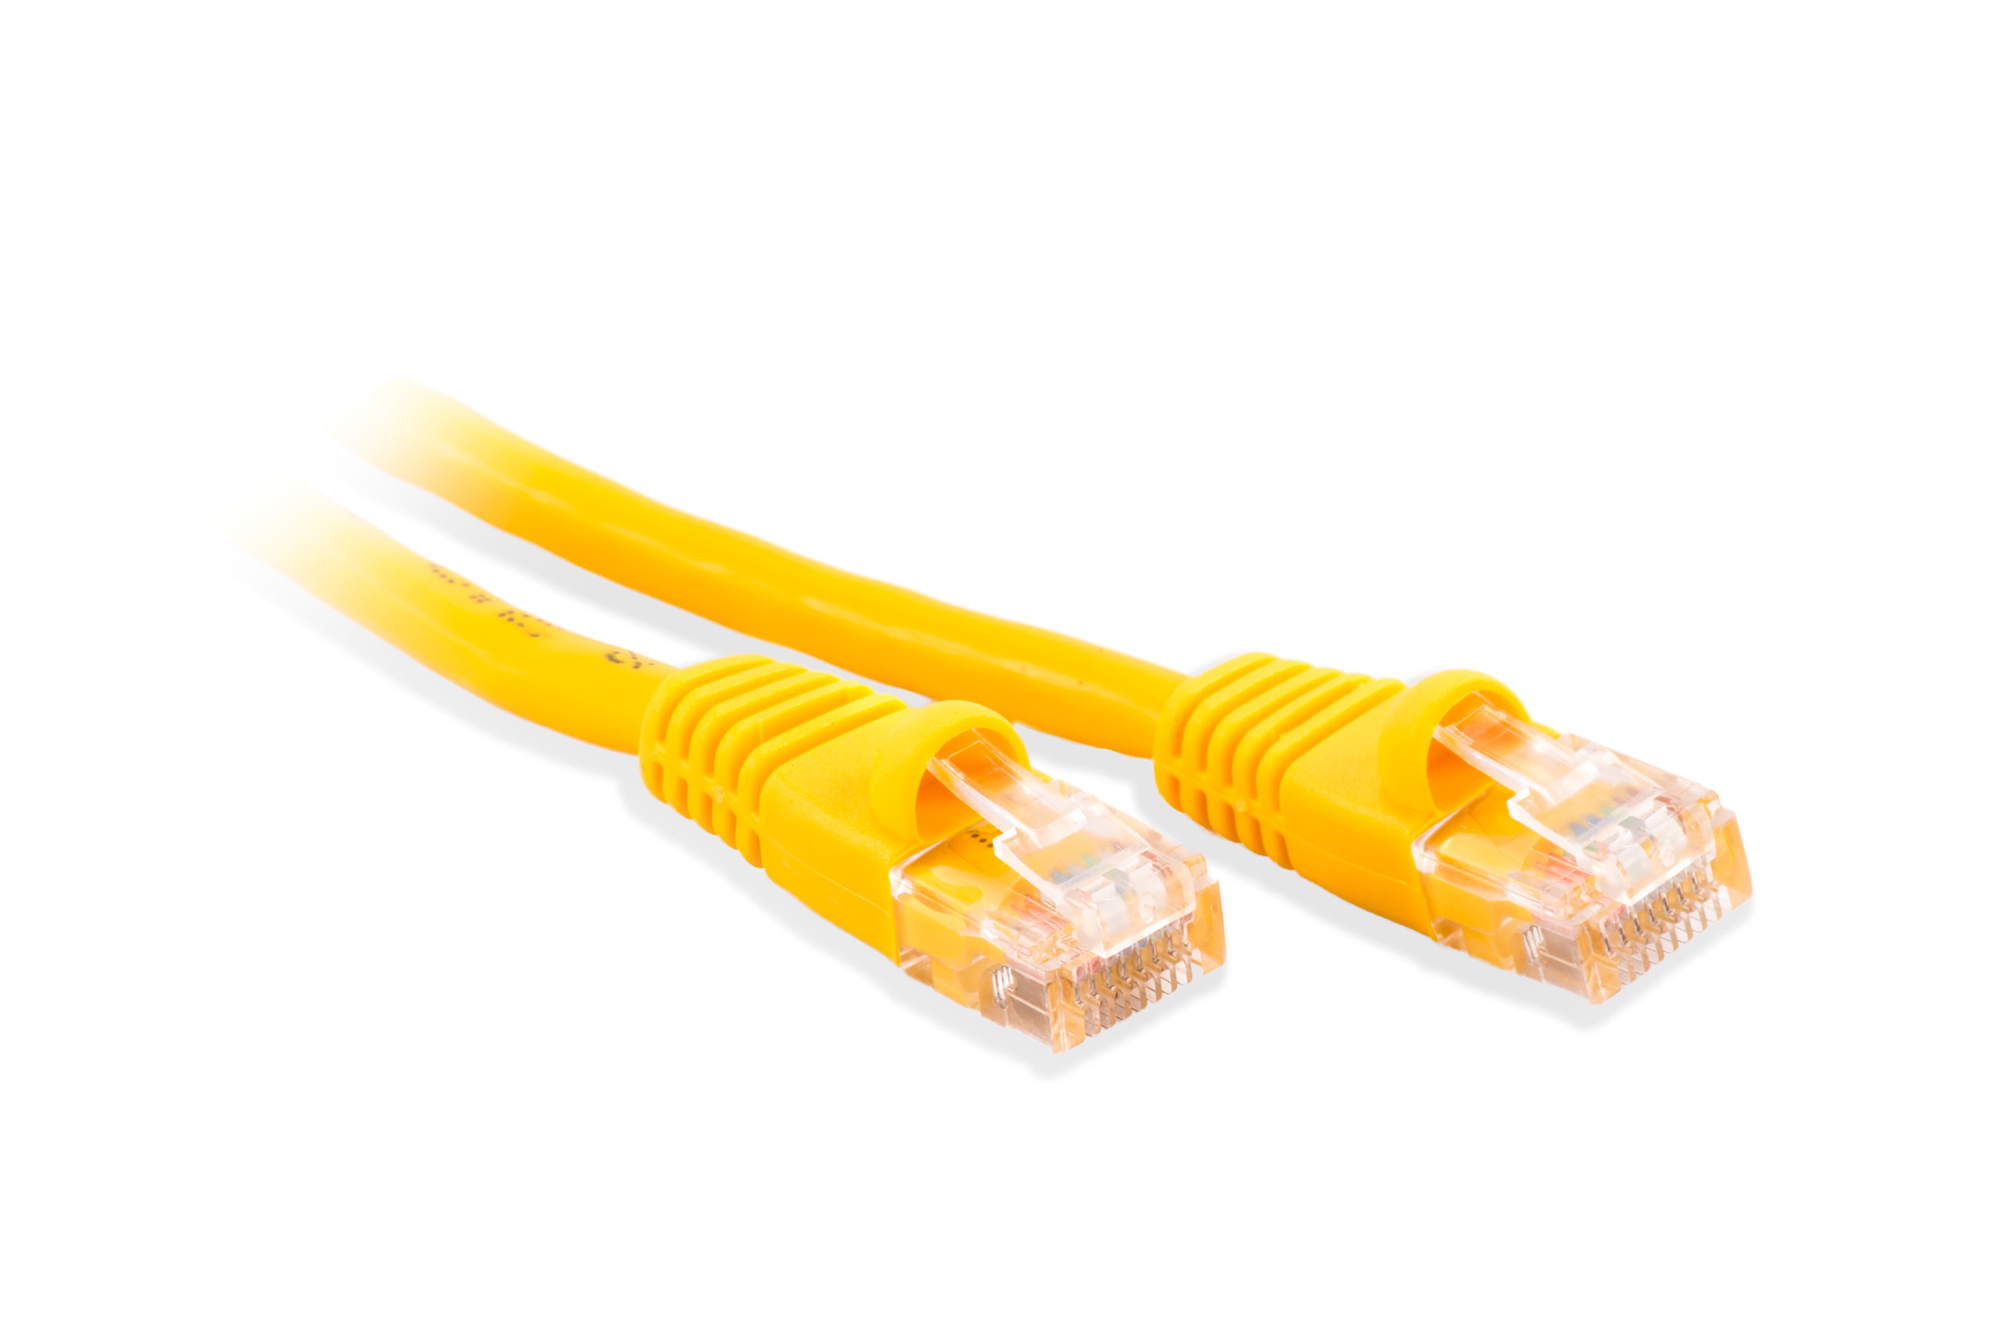 5ft Cat5e Ethernet Patch Cable - Yellow Color - Snagless Boot, Stranded, RJ45, 350Mhz, 24AWG